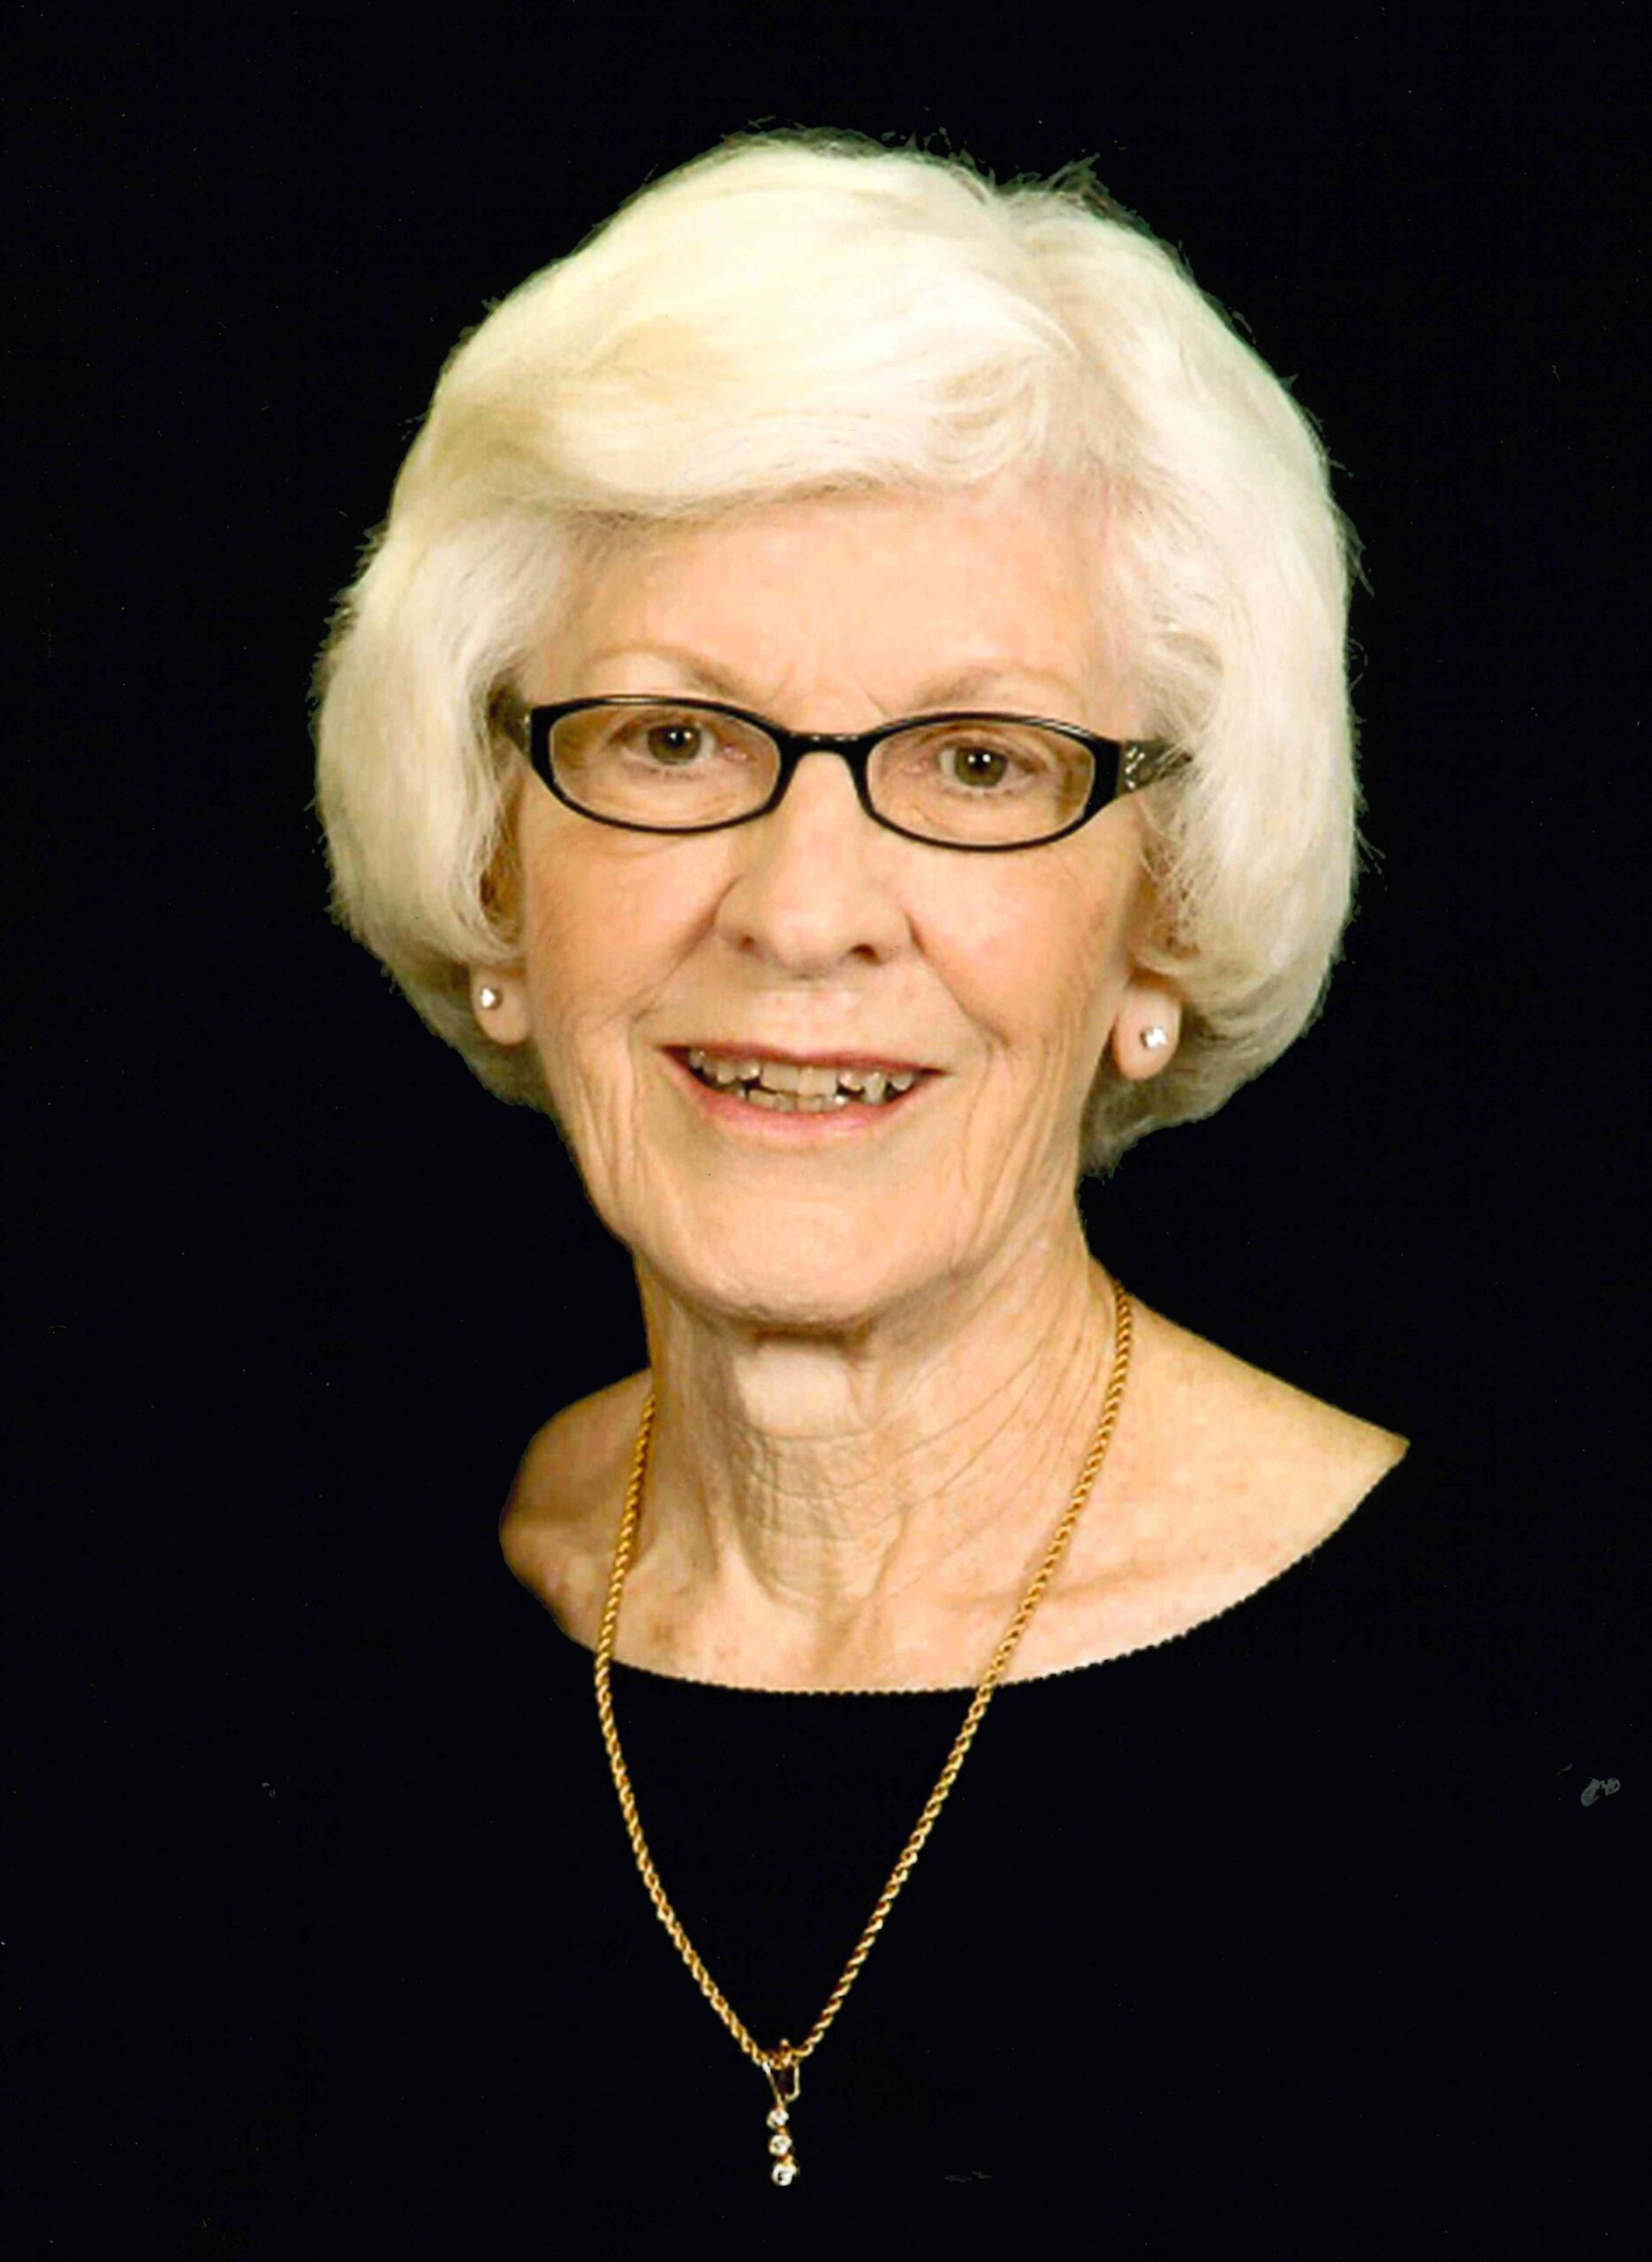 Obituary for Fran Beers